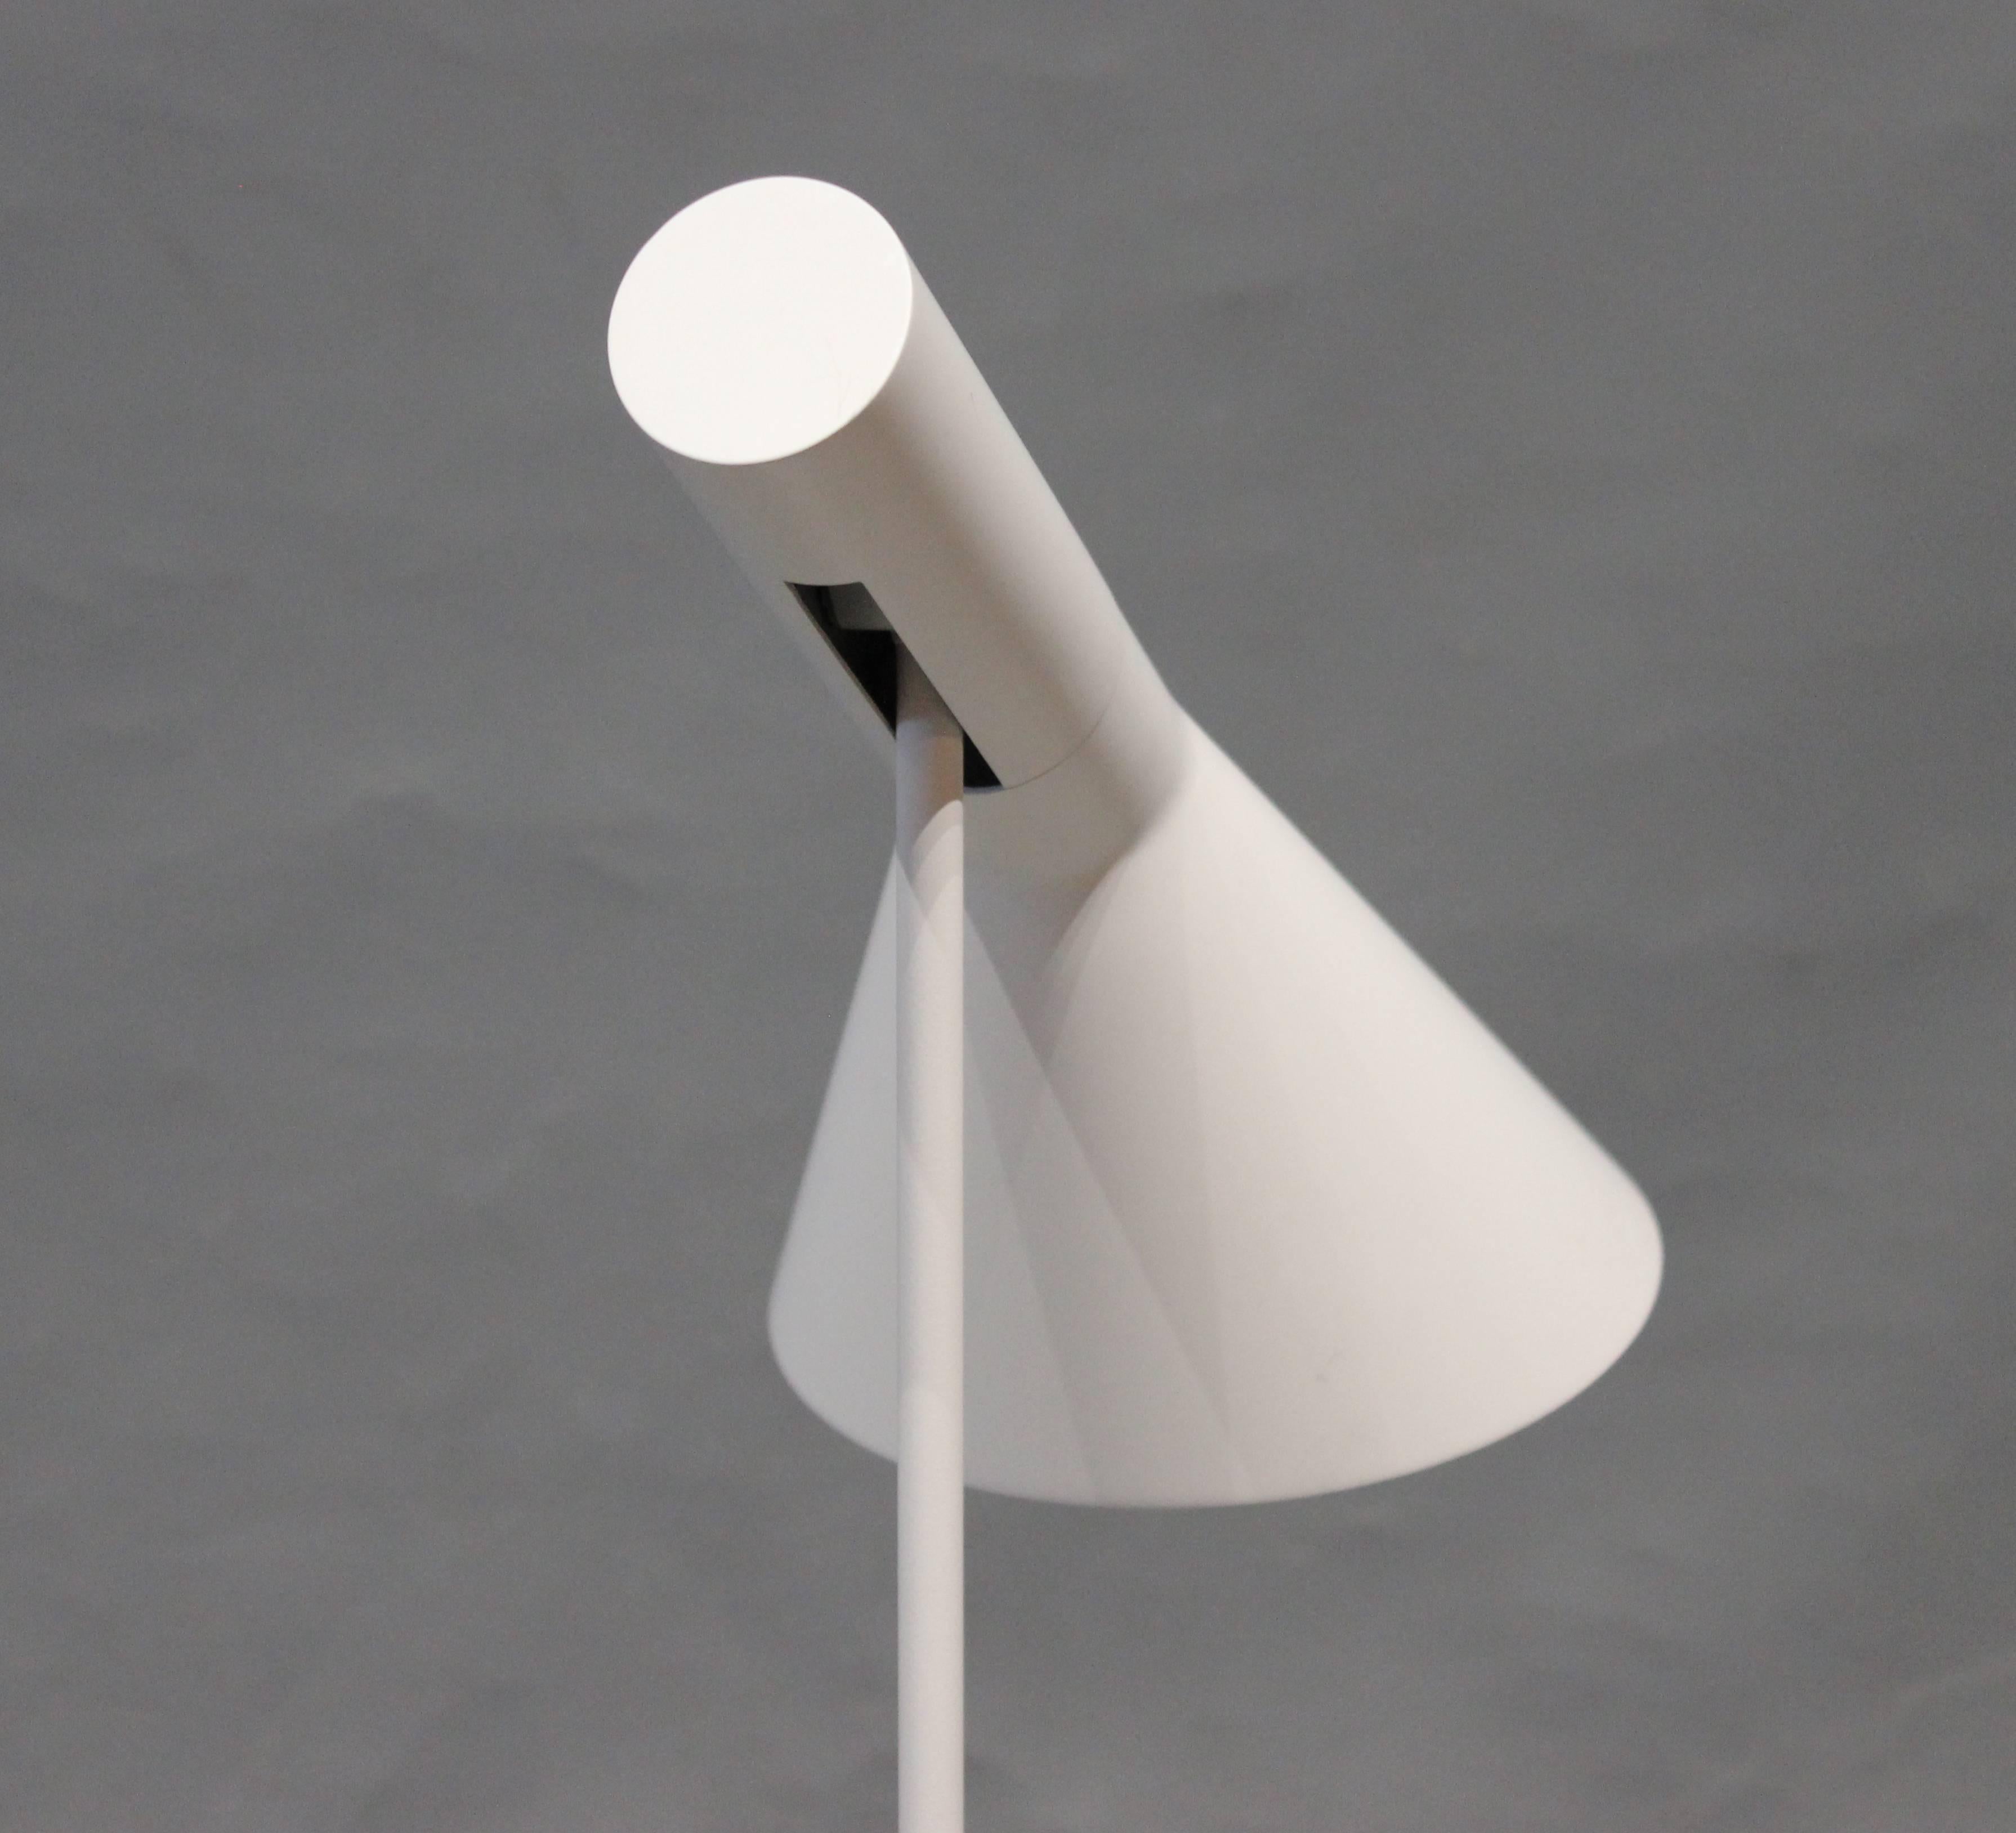 Metal Arne Jacobsen, White Table Lamp, Designed in 1960 and by Louis Poulsen